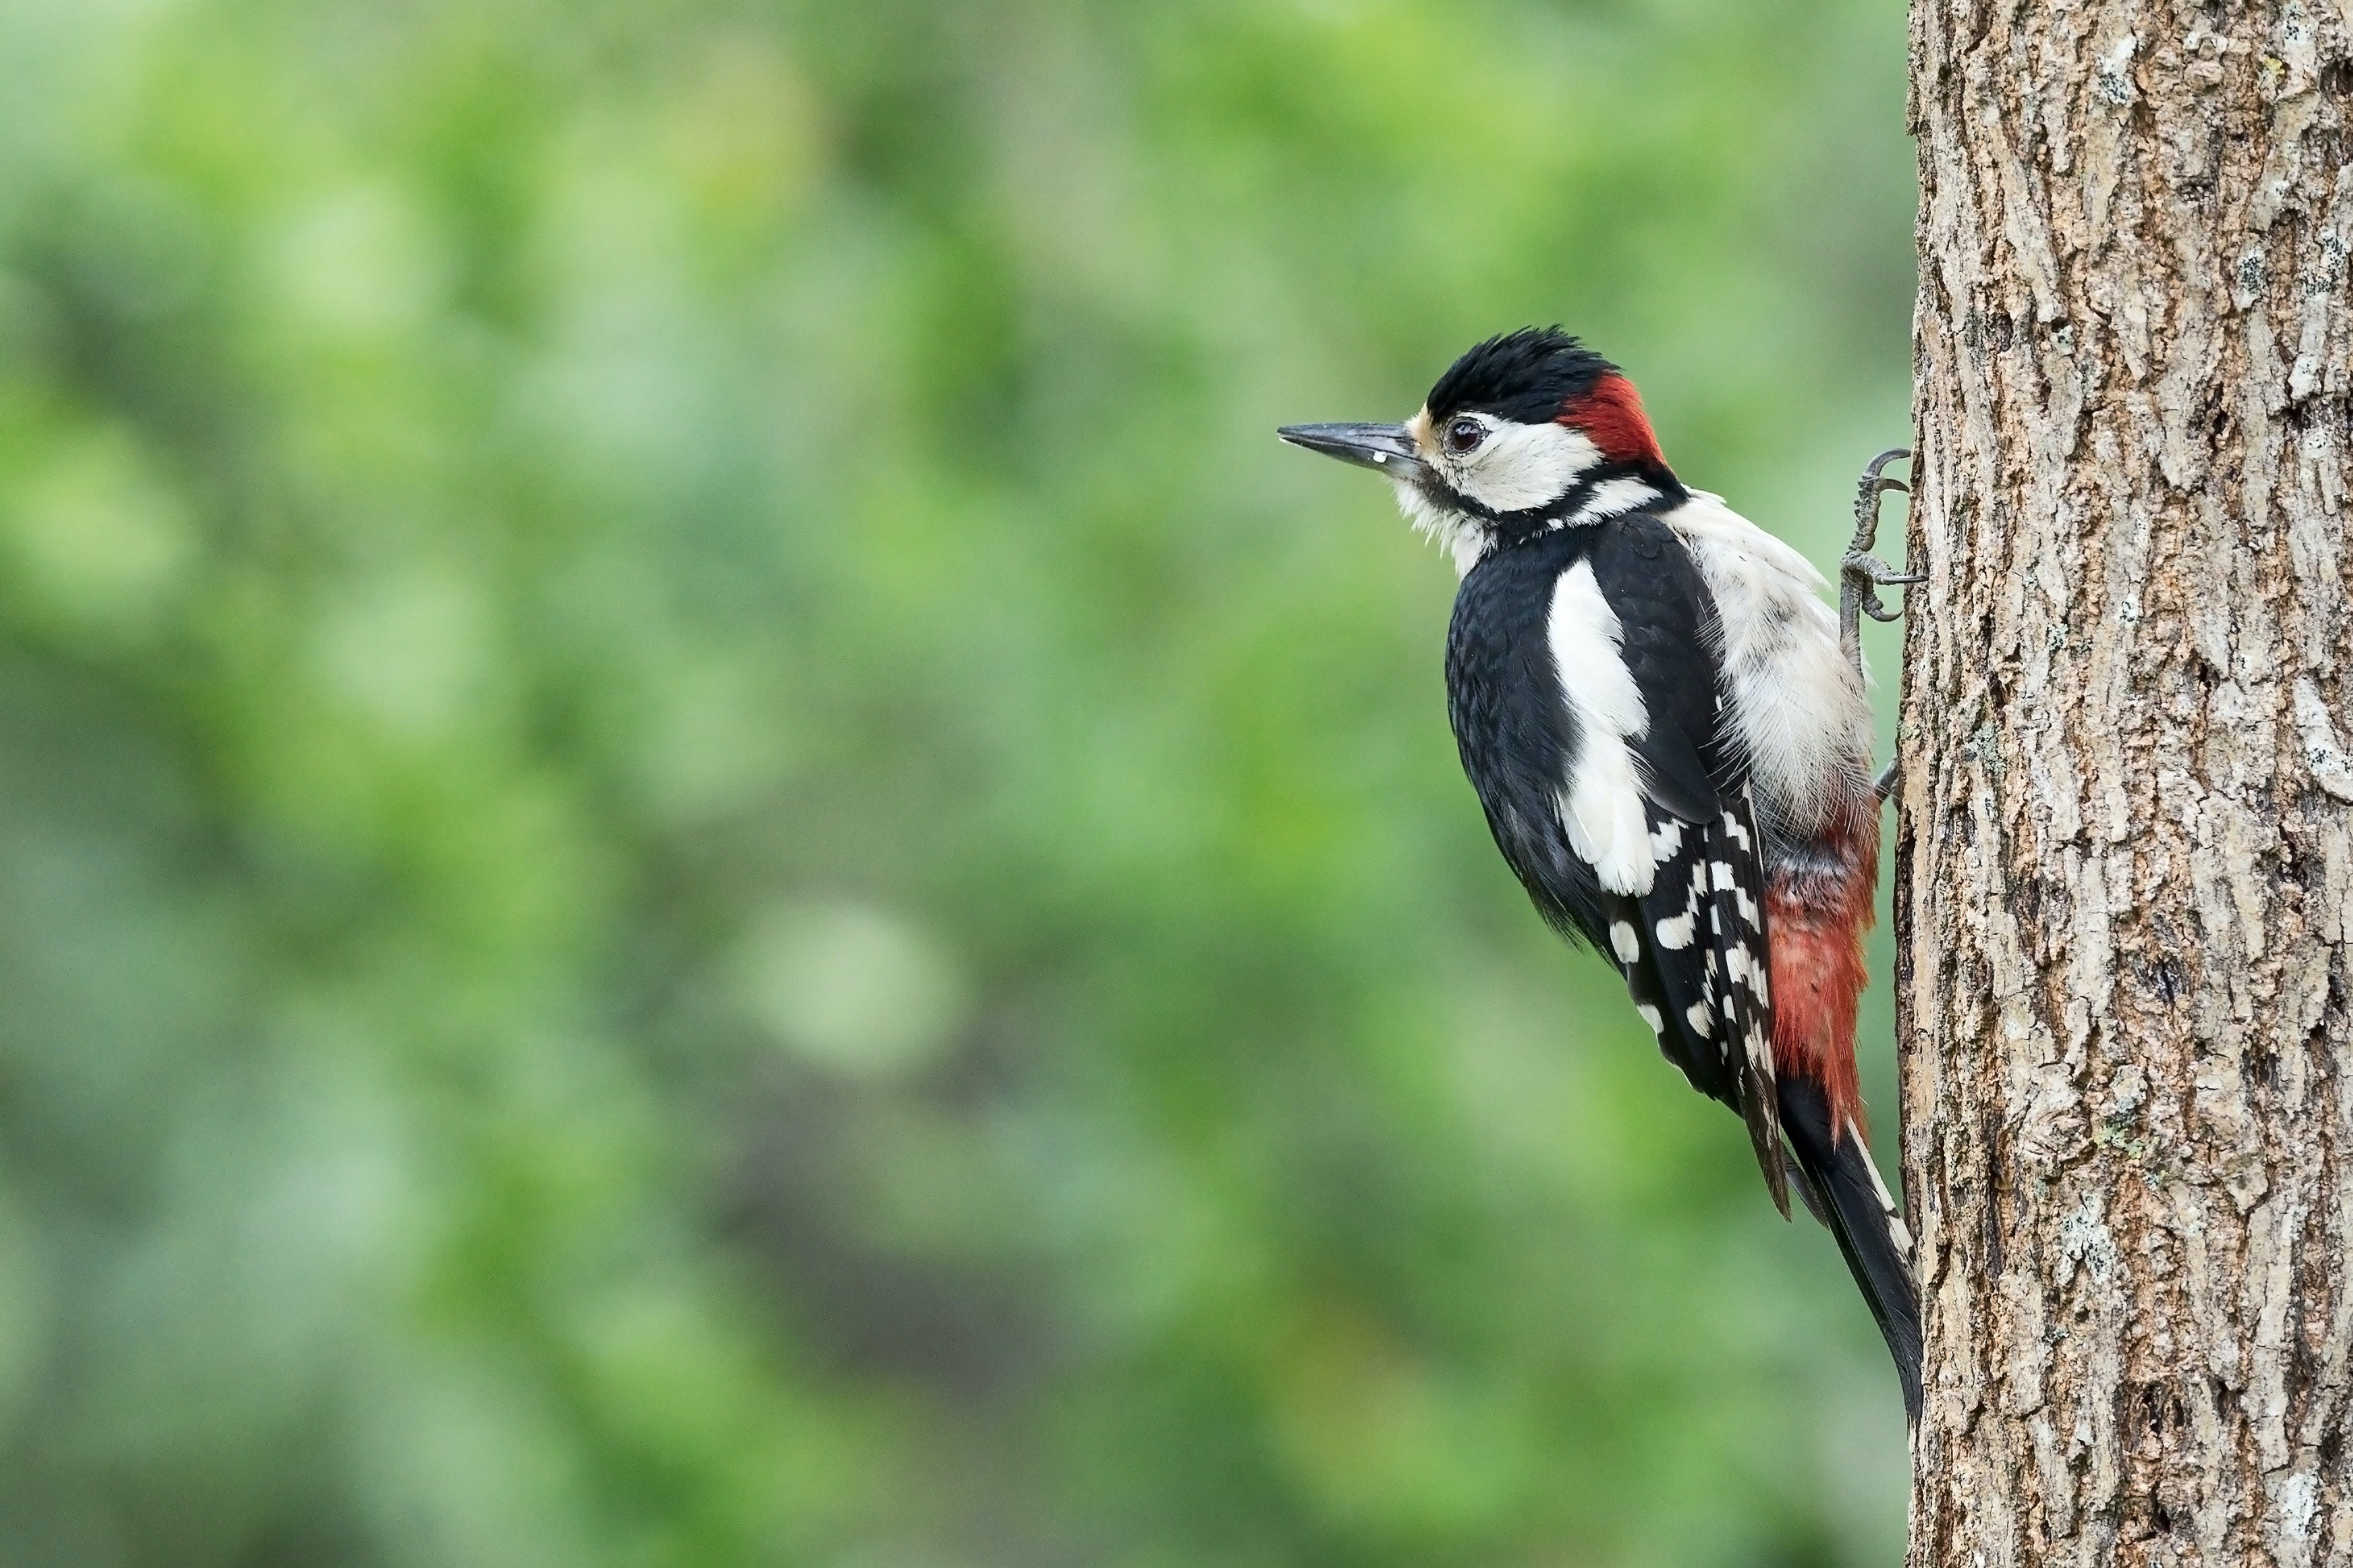 Great spotted woodpecker on a tree trunk. Photo by Hans Veth on Unsplash